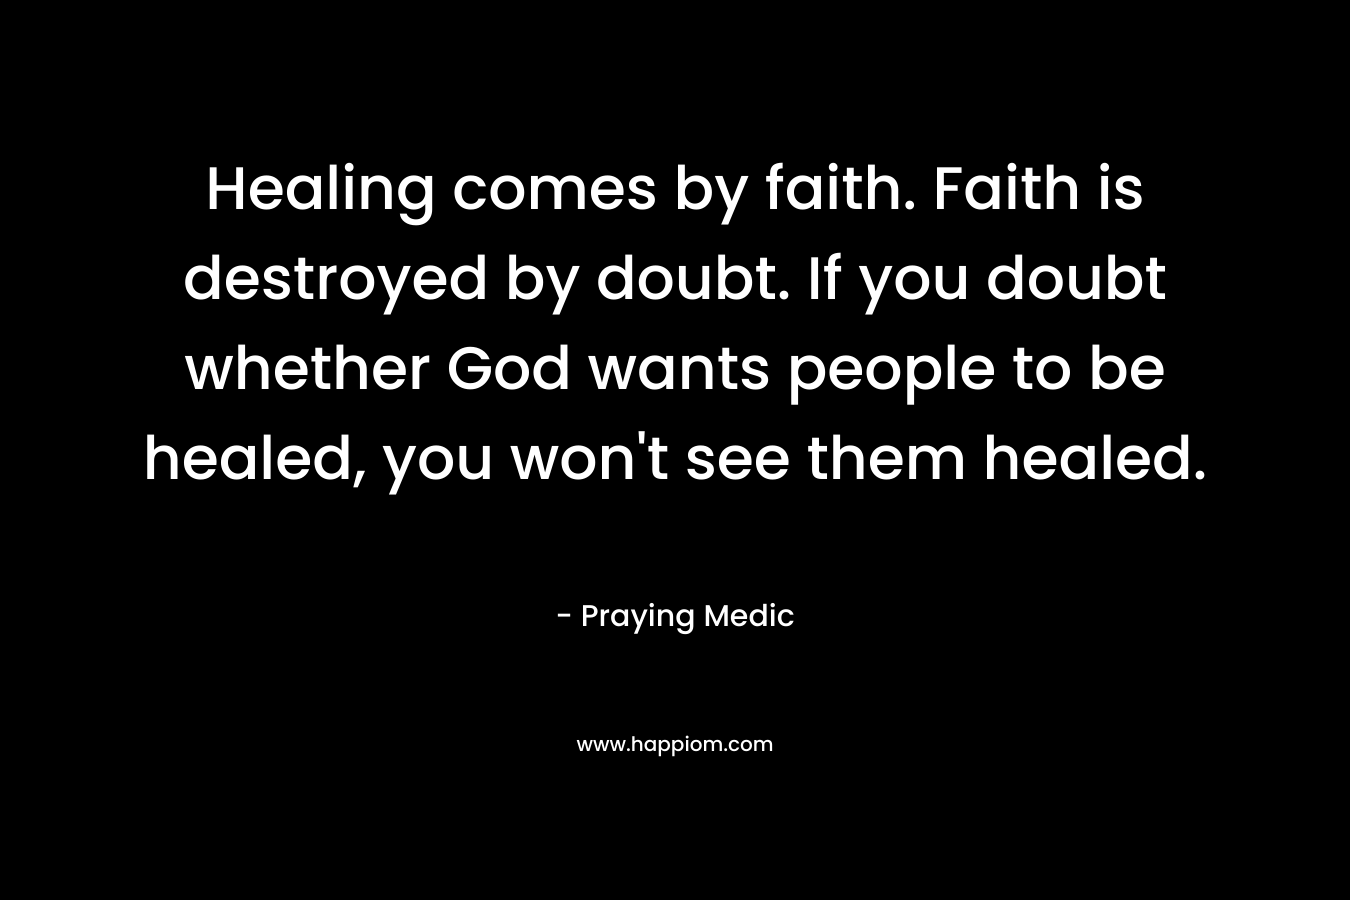 Healing comes by faith. Faith is destroyed by doubt. If you doubt whether God wants people to be healed, you won't see them healed.